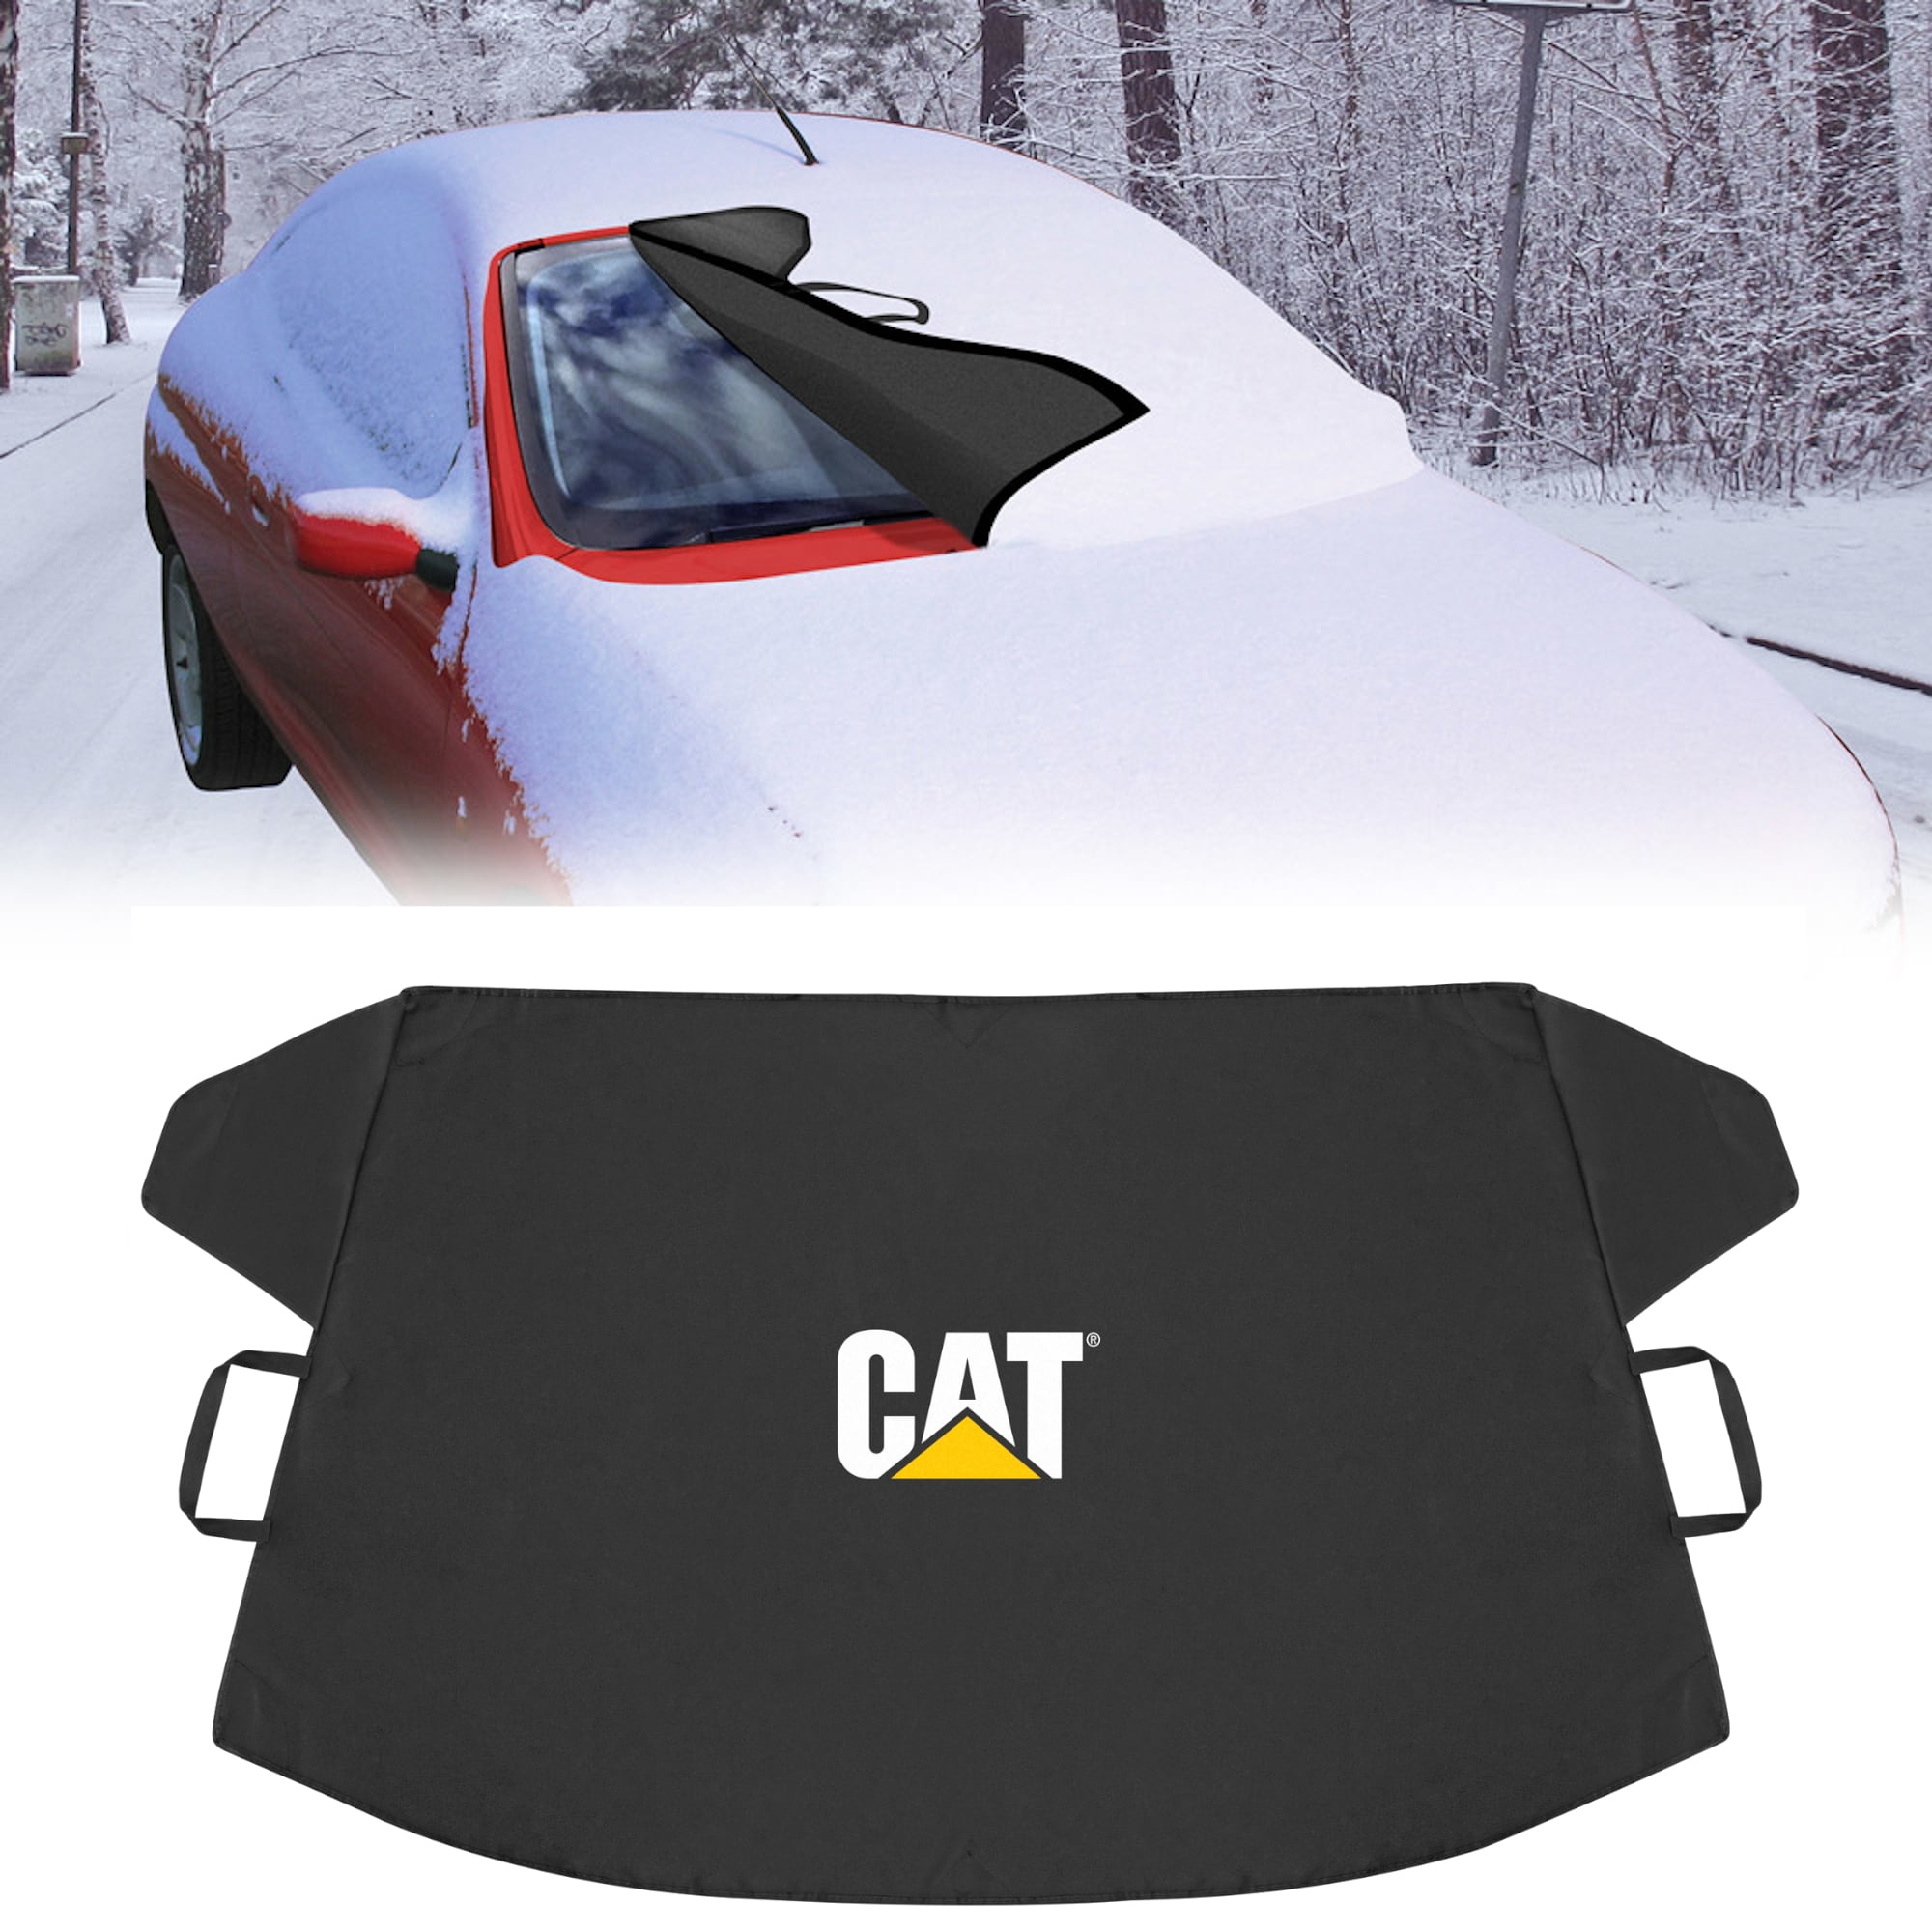 GetUSCart- ALTITACO Car Windshield Snow Cover, Frost Guard Protector,  Magnetic Windshield Snow Frost Ice Cover Sunshade Snow Covers with Elastic  Hooks Fits Most Car, SUV, Truck, Van or Automobile with 83x49.2